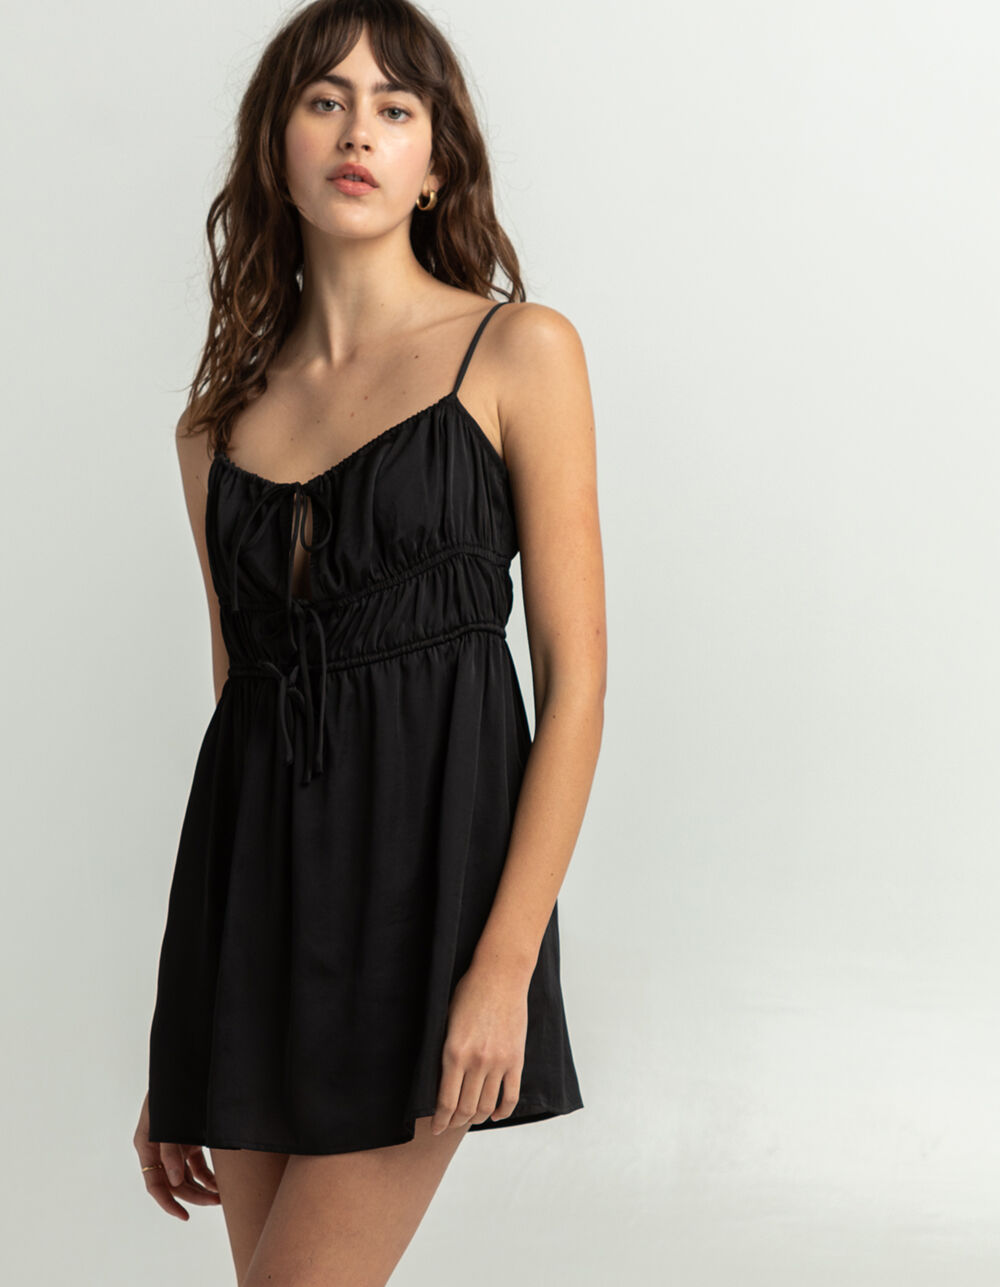 FREE PEOPLE Meant to Be Mini Dress - BLACK | Tillys